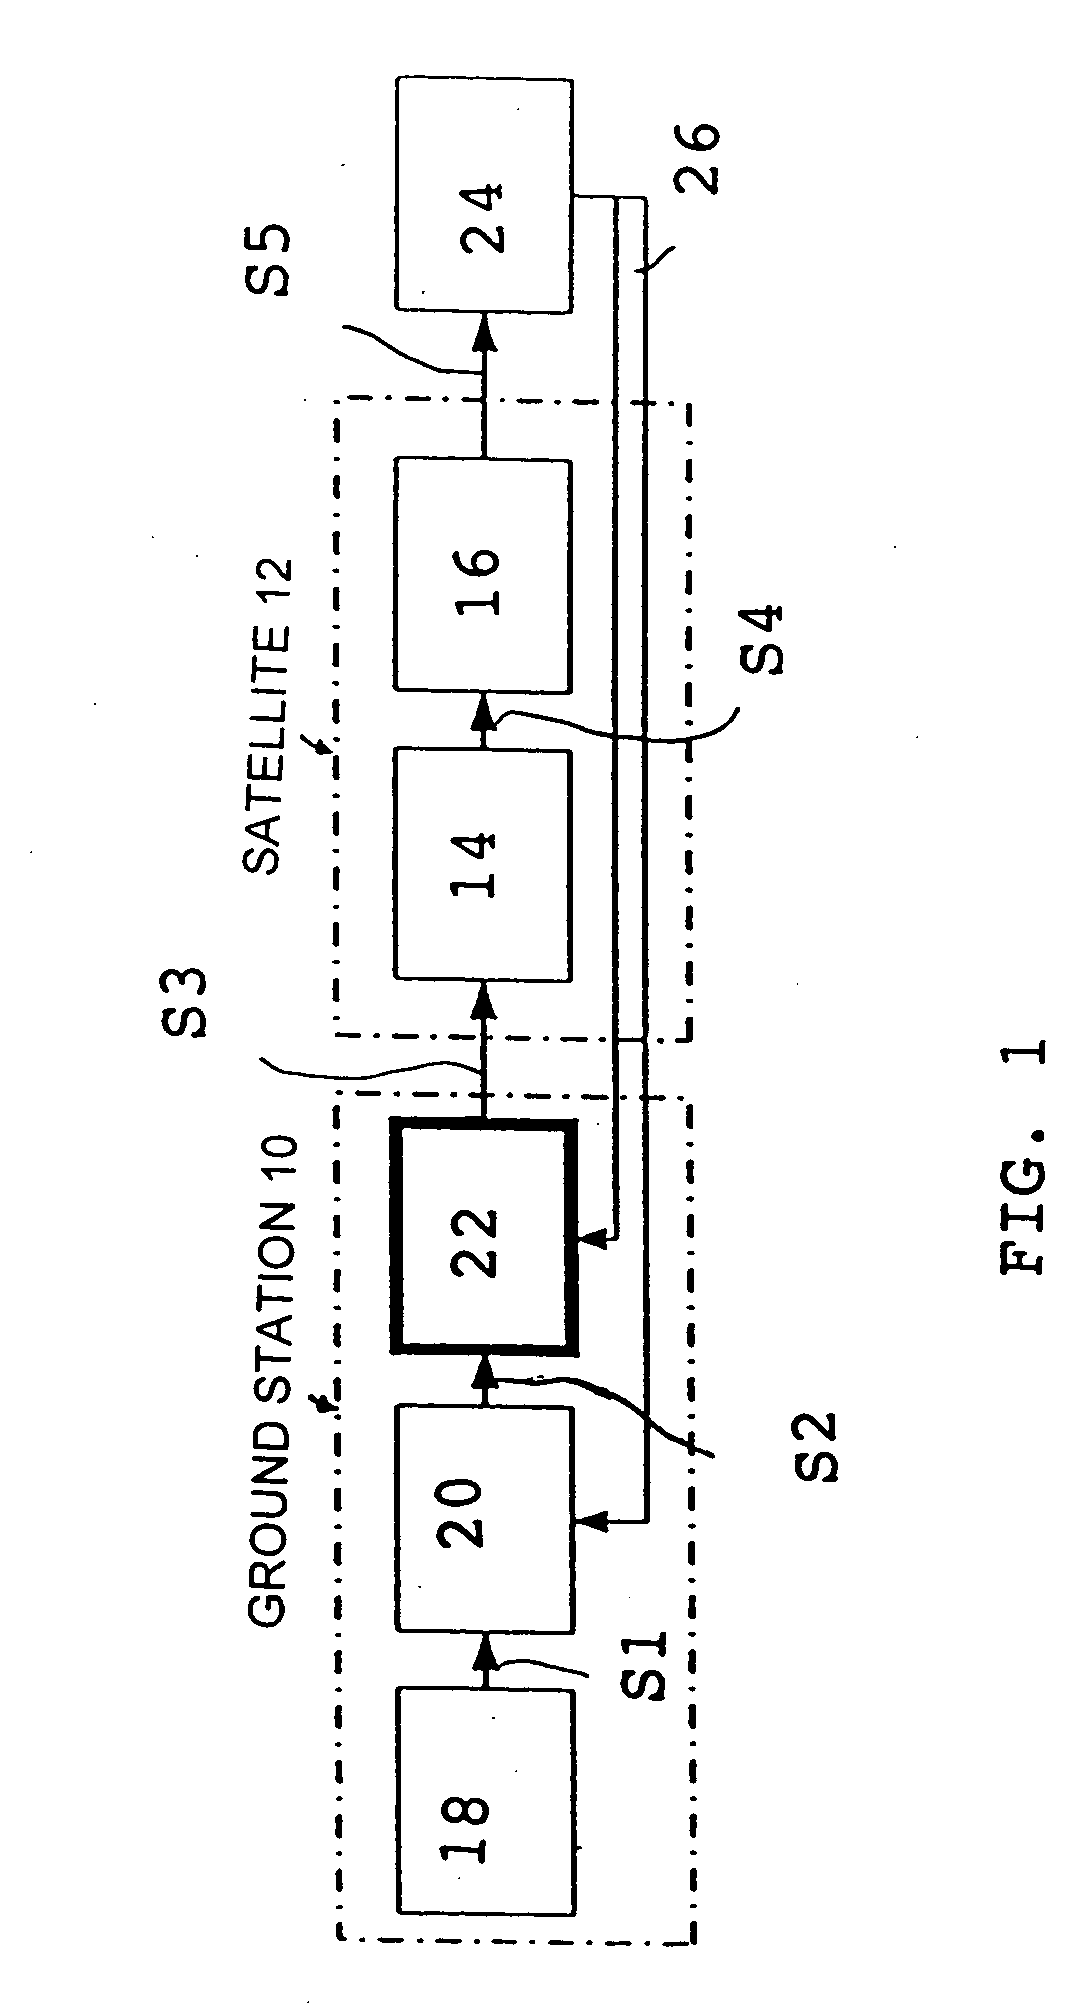 Device and method for pre-treating a signal to be transmitted using a non-linear amplifier with an upstream band-pass filter